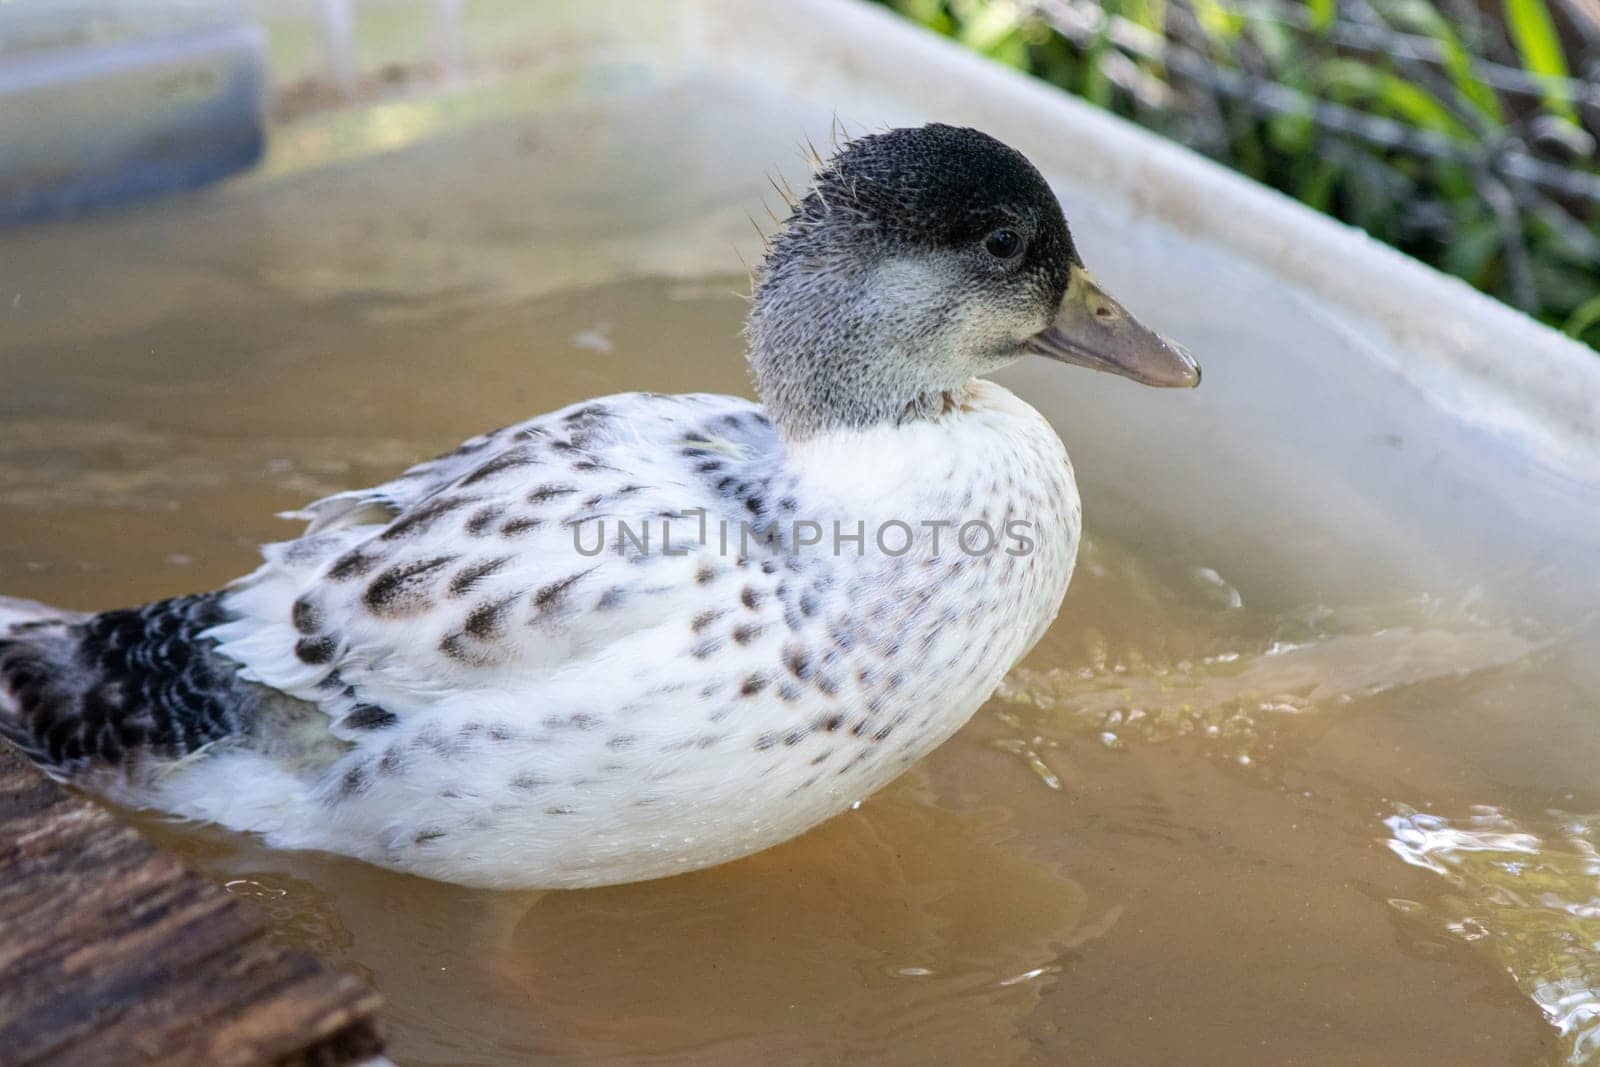 Younger Snowy Calls ducks playing in a tote of water . High quality photo